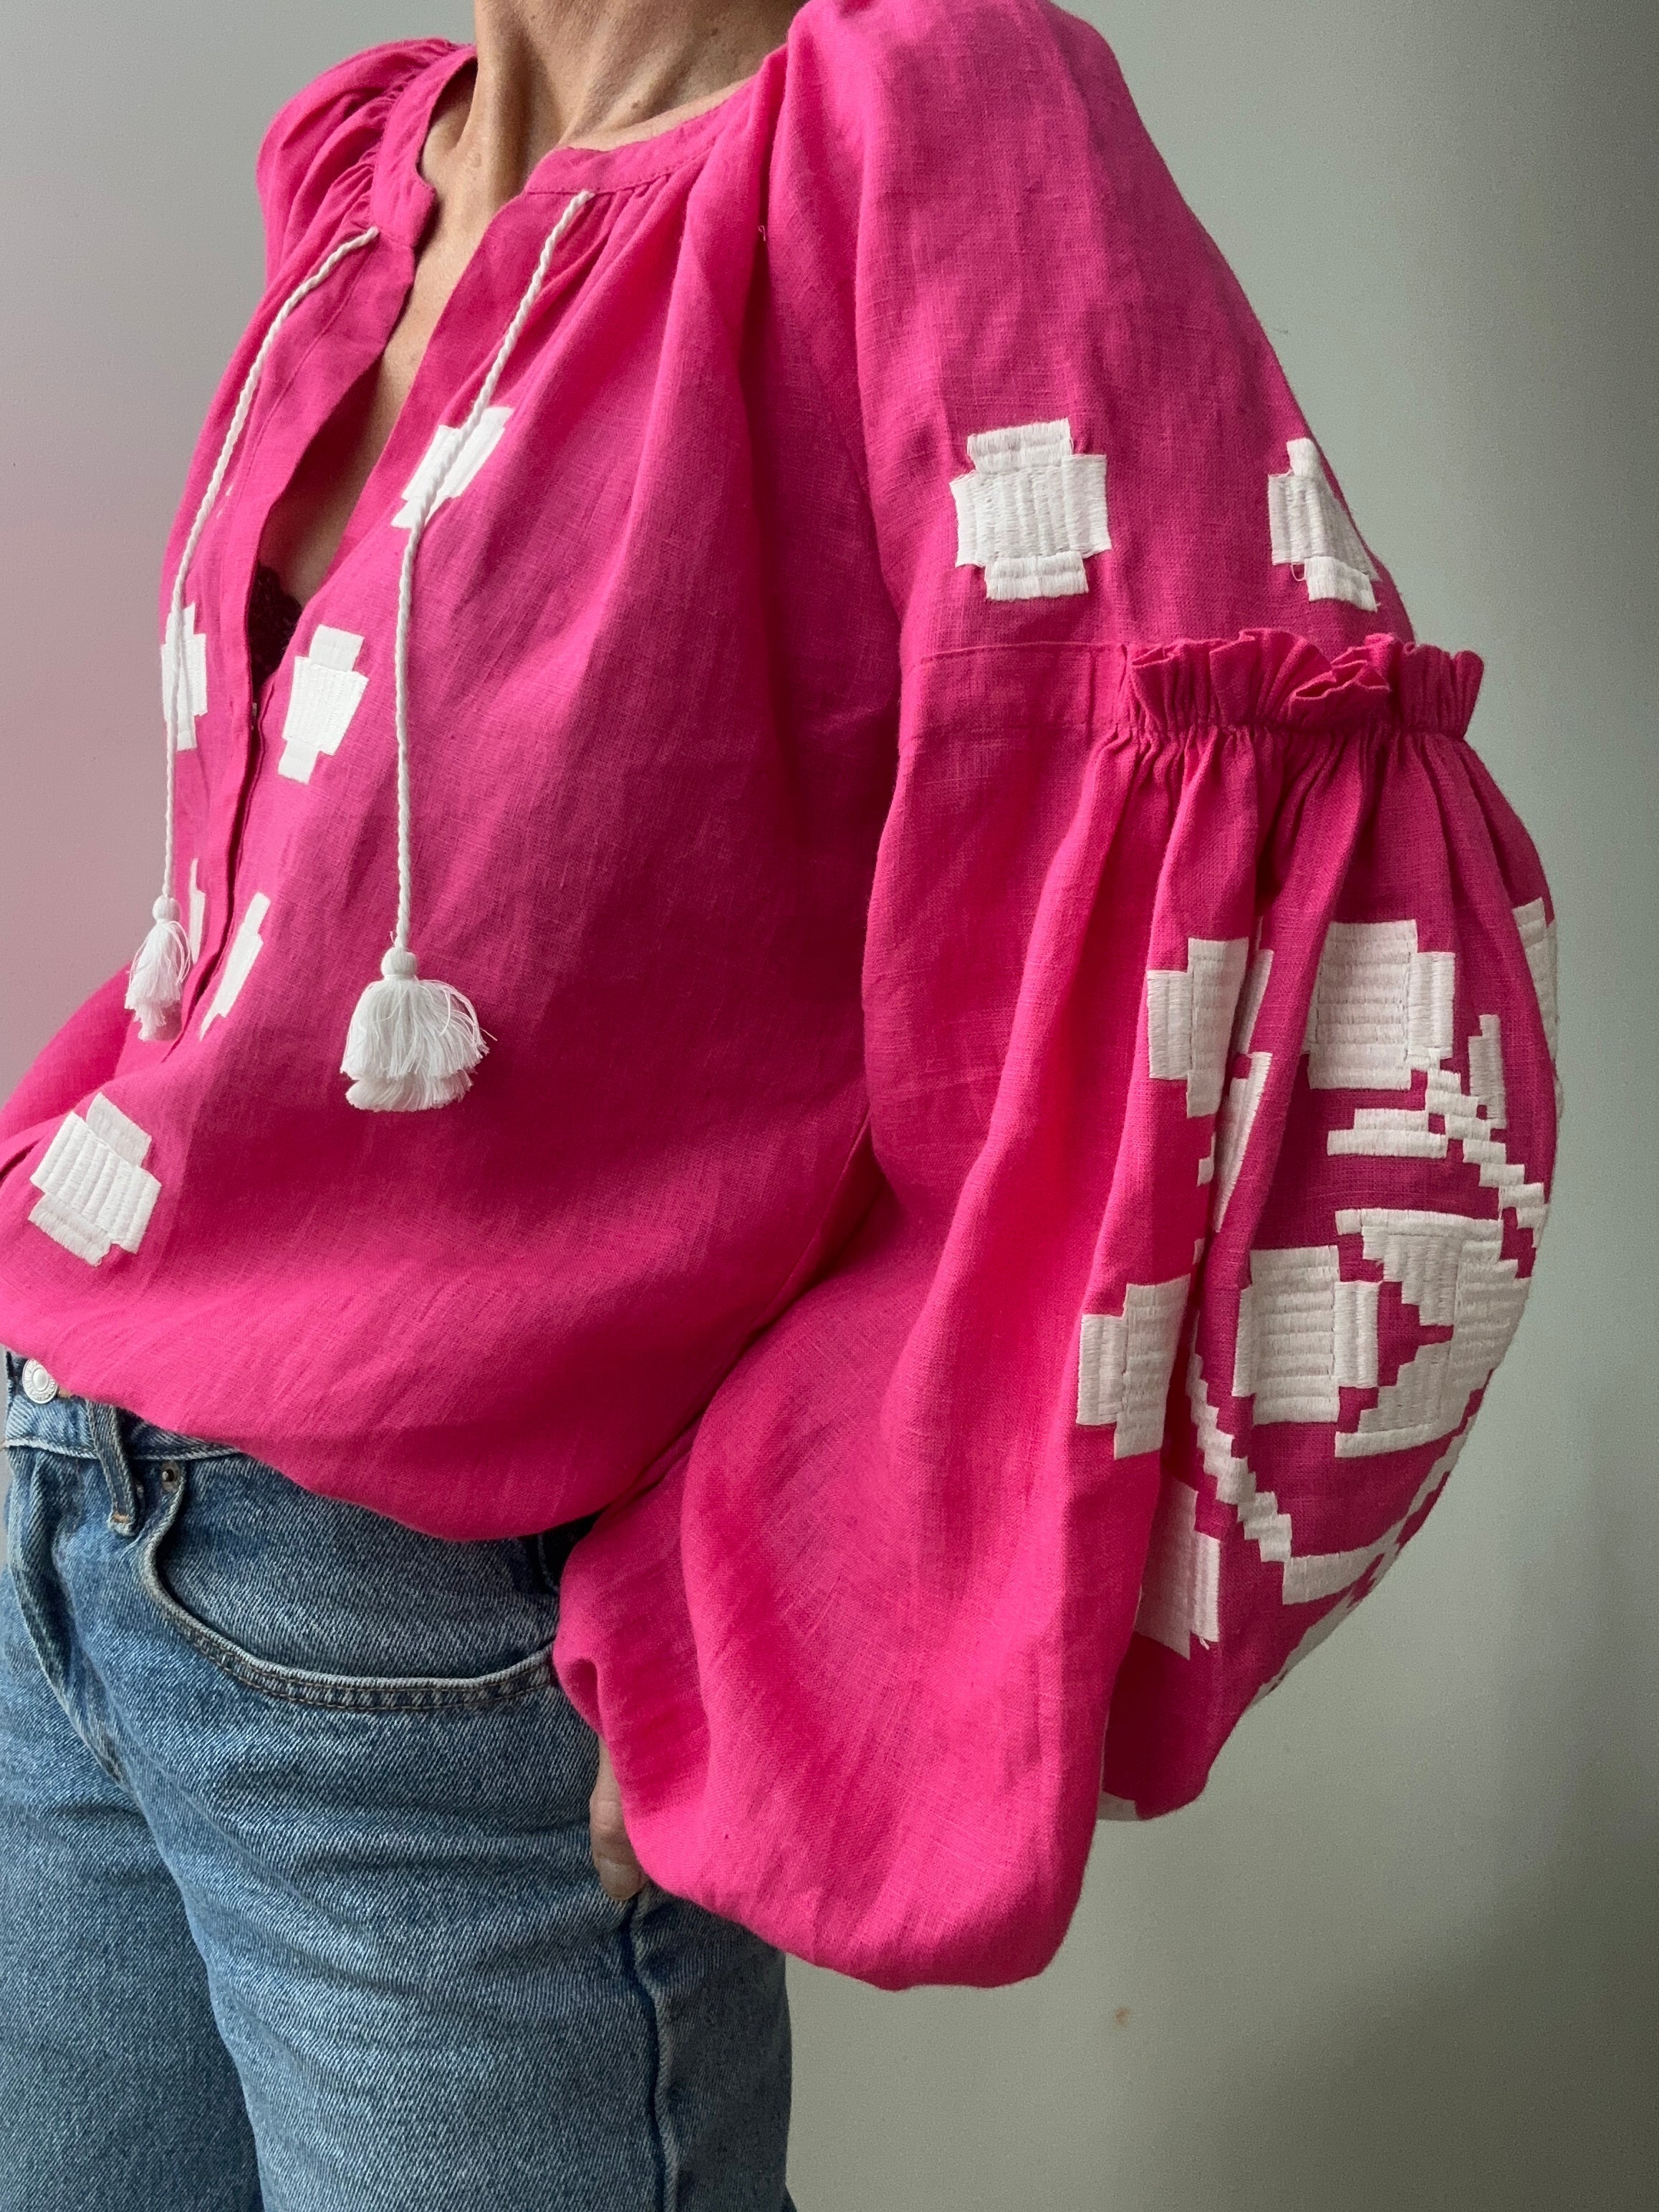 March 11 Blouses March 11 Geometric Blouse Pink